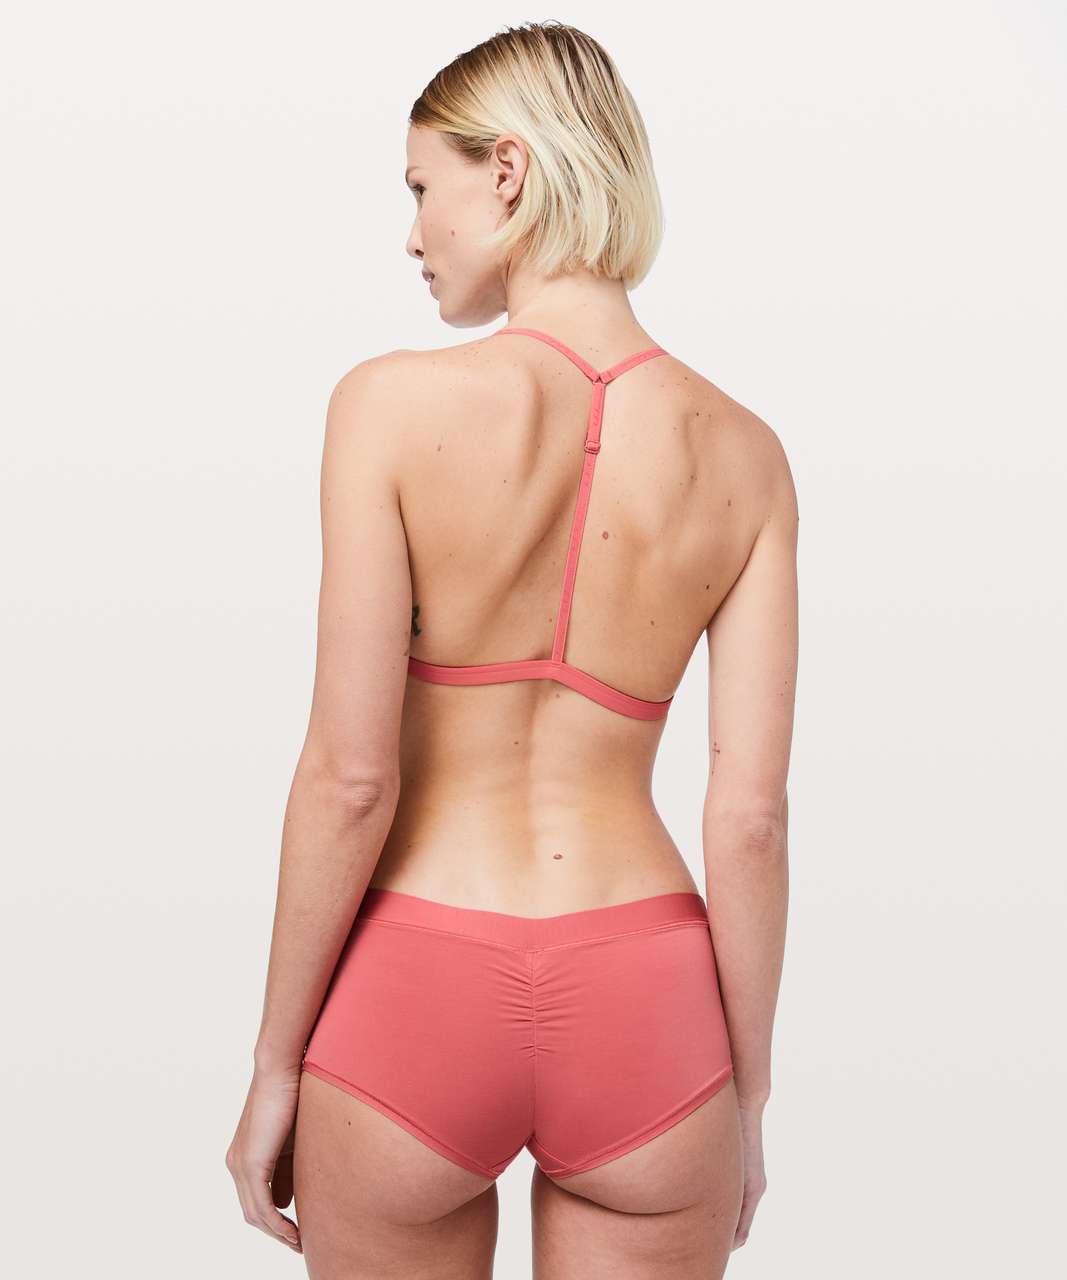 Lululemon Simply There Triangle Bralette - Blush Coral